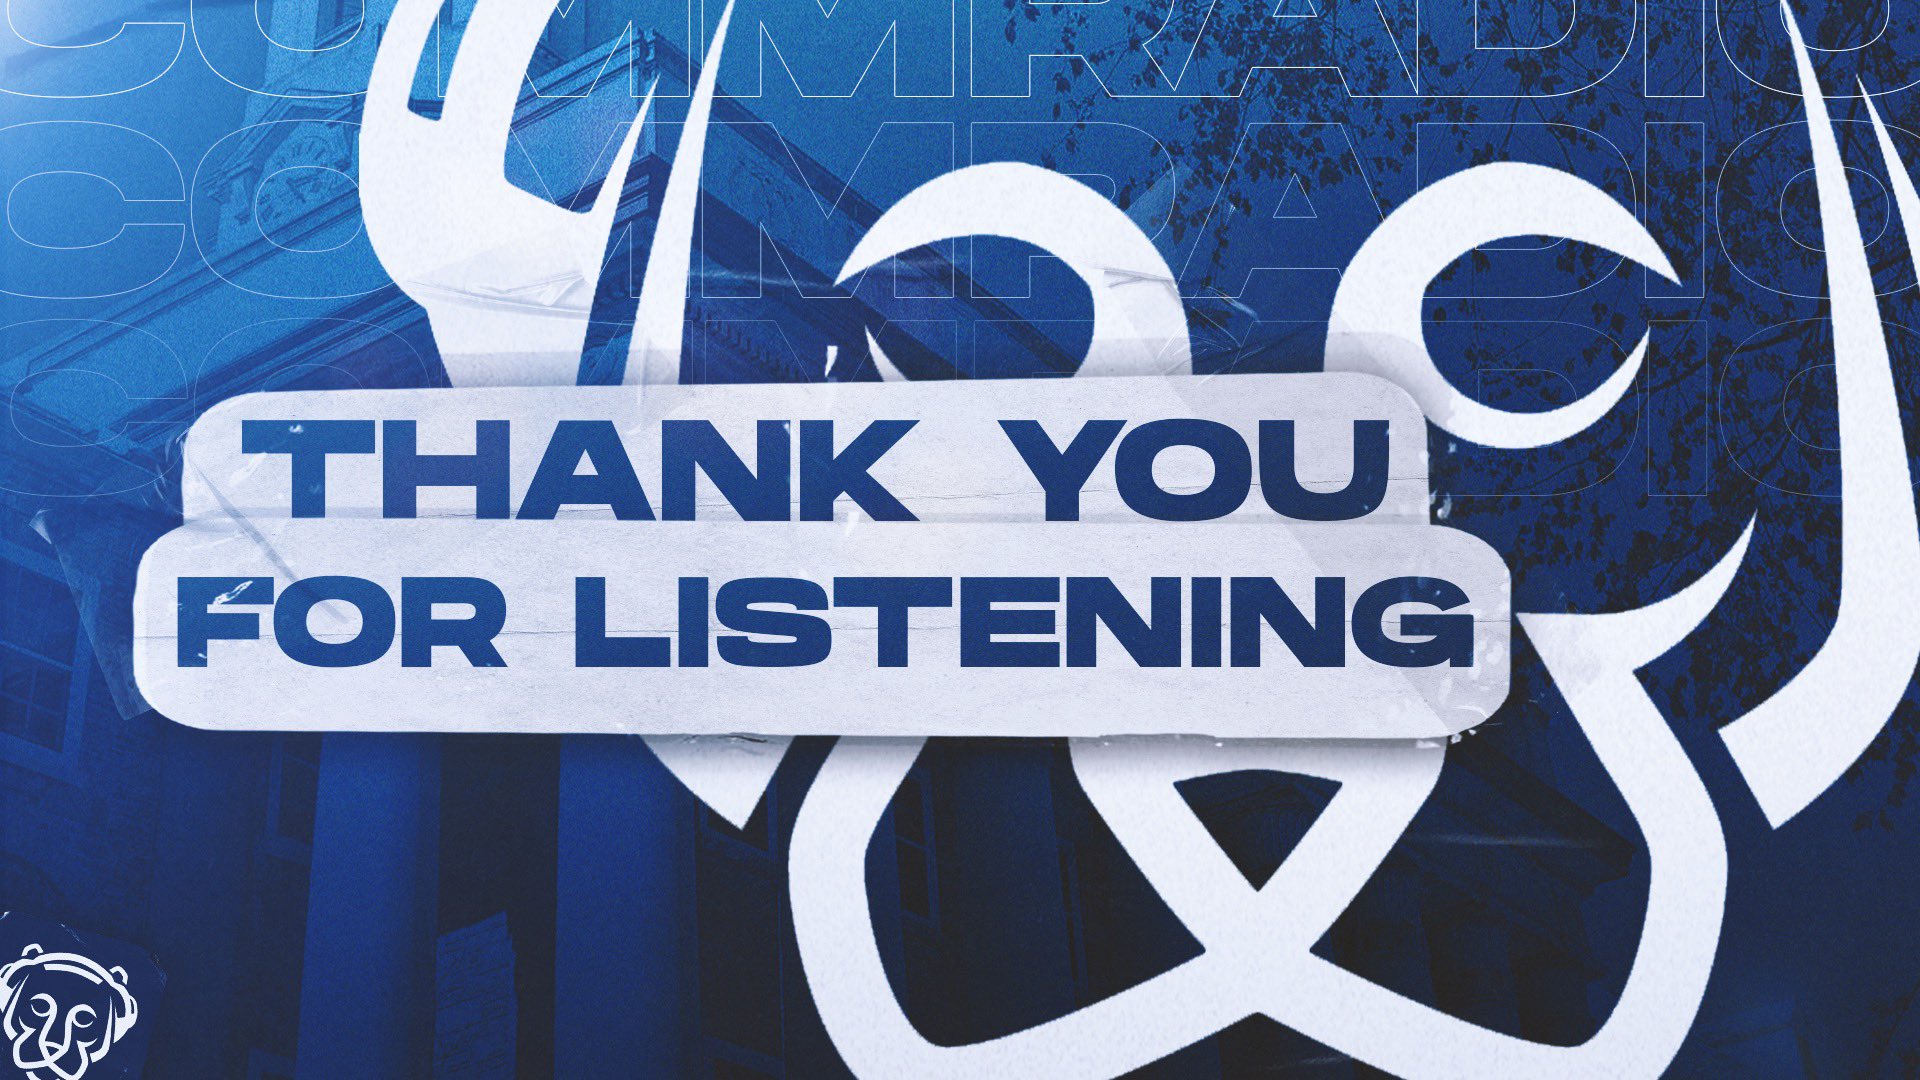 Penn State CommRadio and its members want to thank you for listening and following our content all year long. Our team's dedication to the station was unmatched. Congratulations to